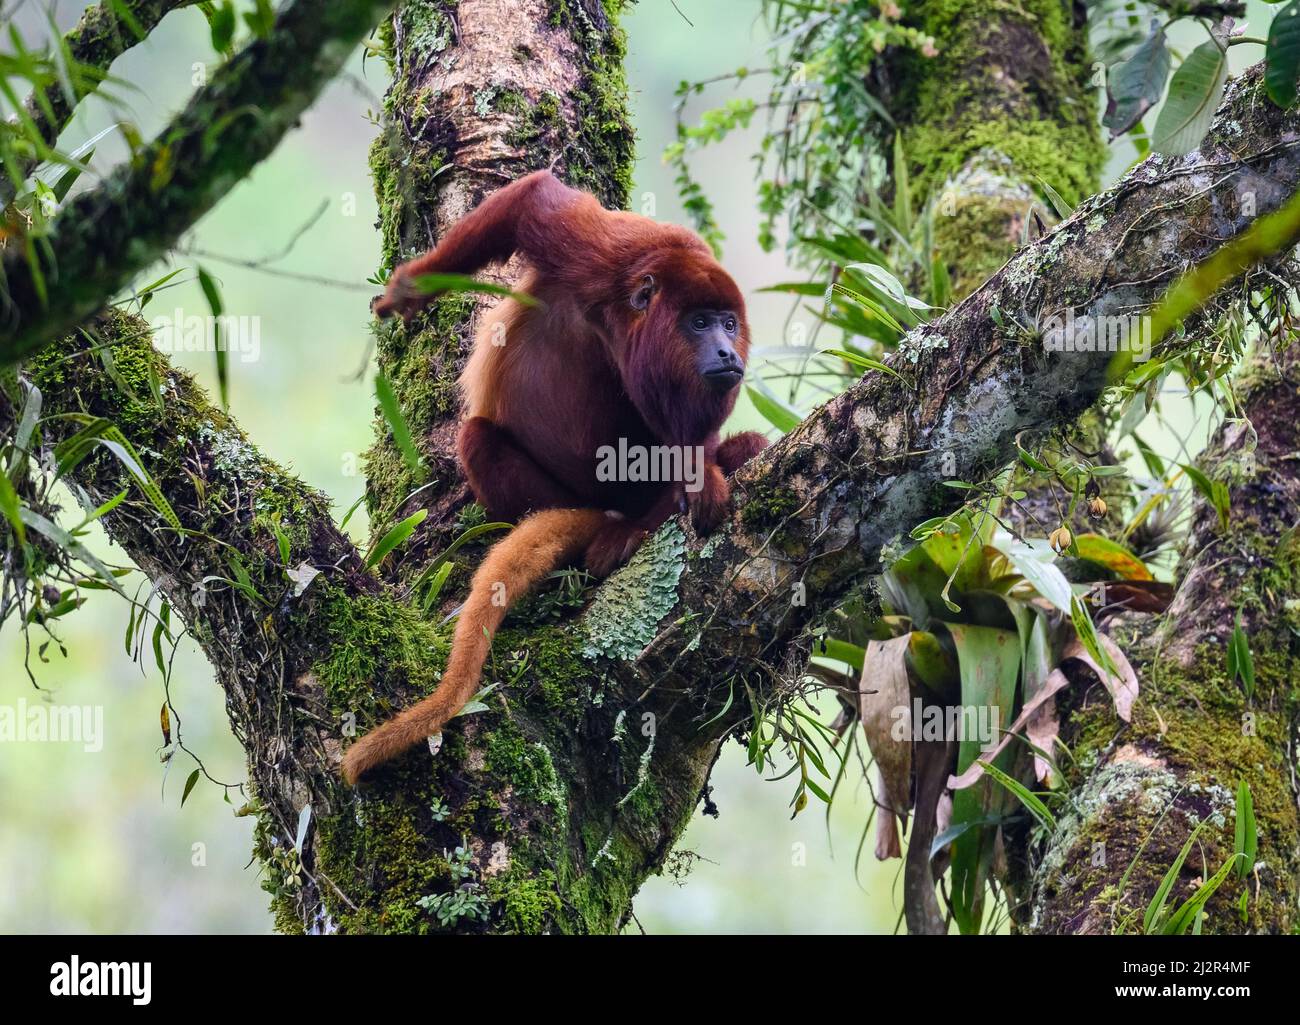 A wild Colombian Red Howler monkey (Alouatta seniculus) sitting on a big tree in rain forest. Colombia, South America. Stock Photo